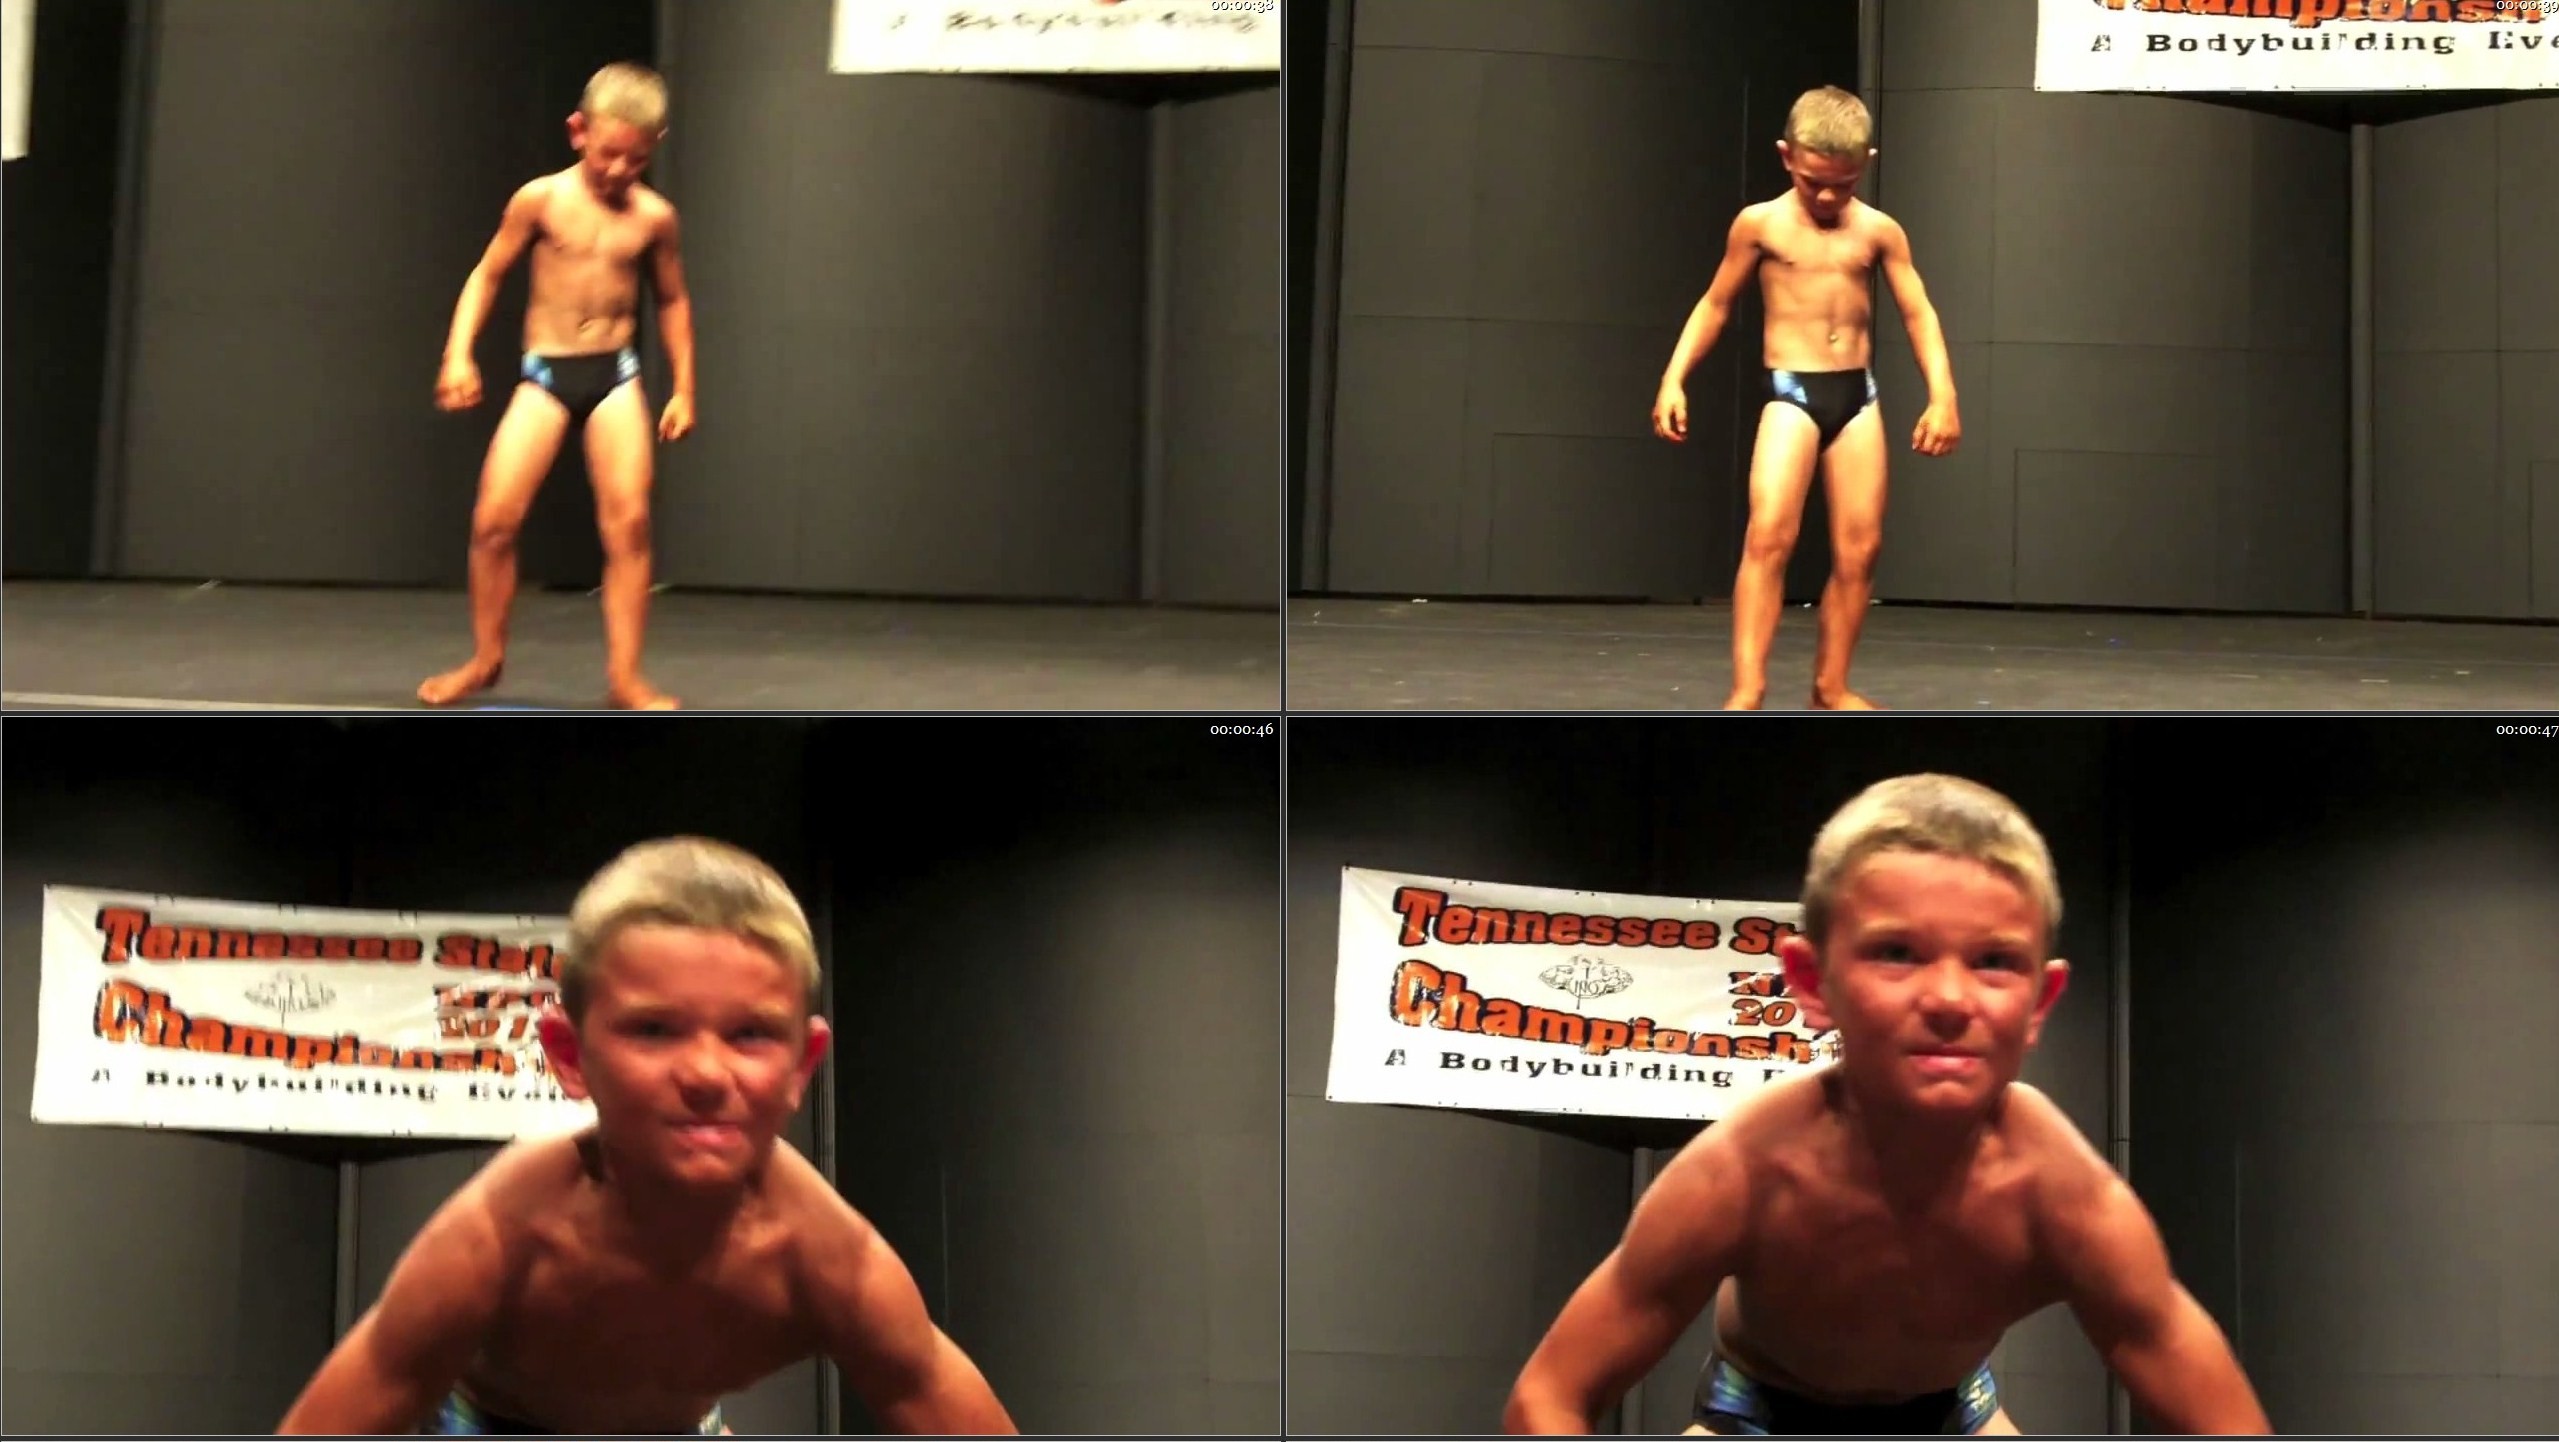 8 year old Tennessee State Bodyb